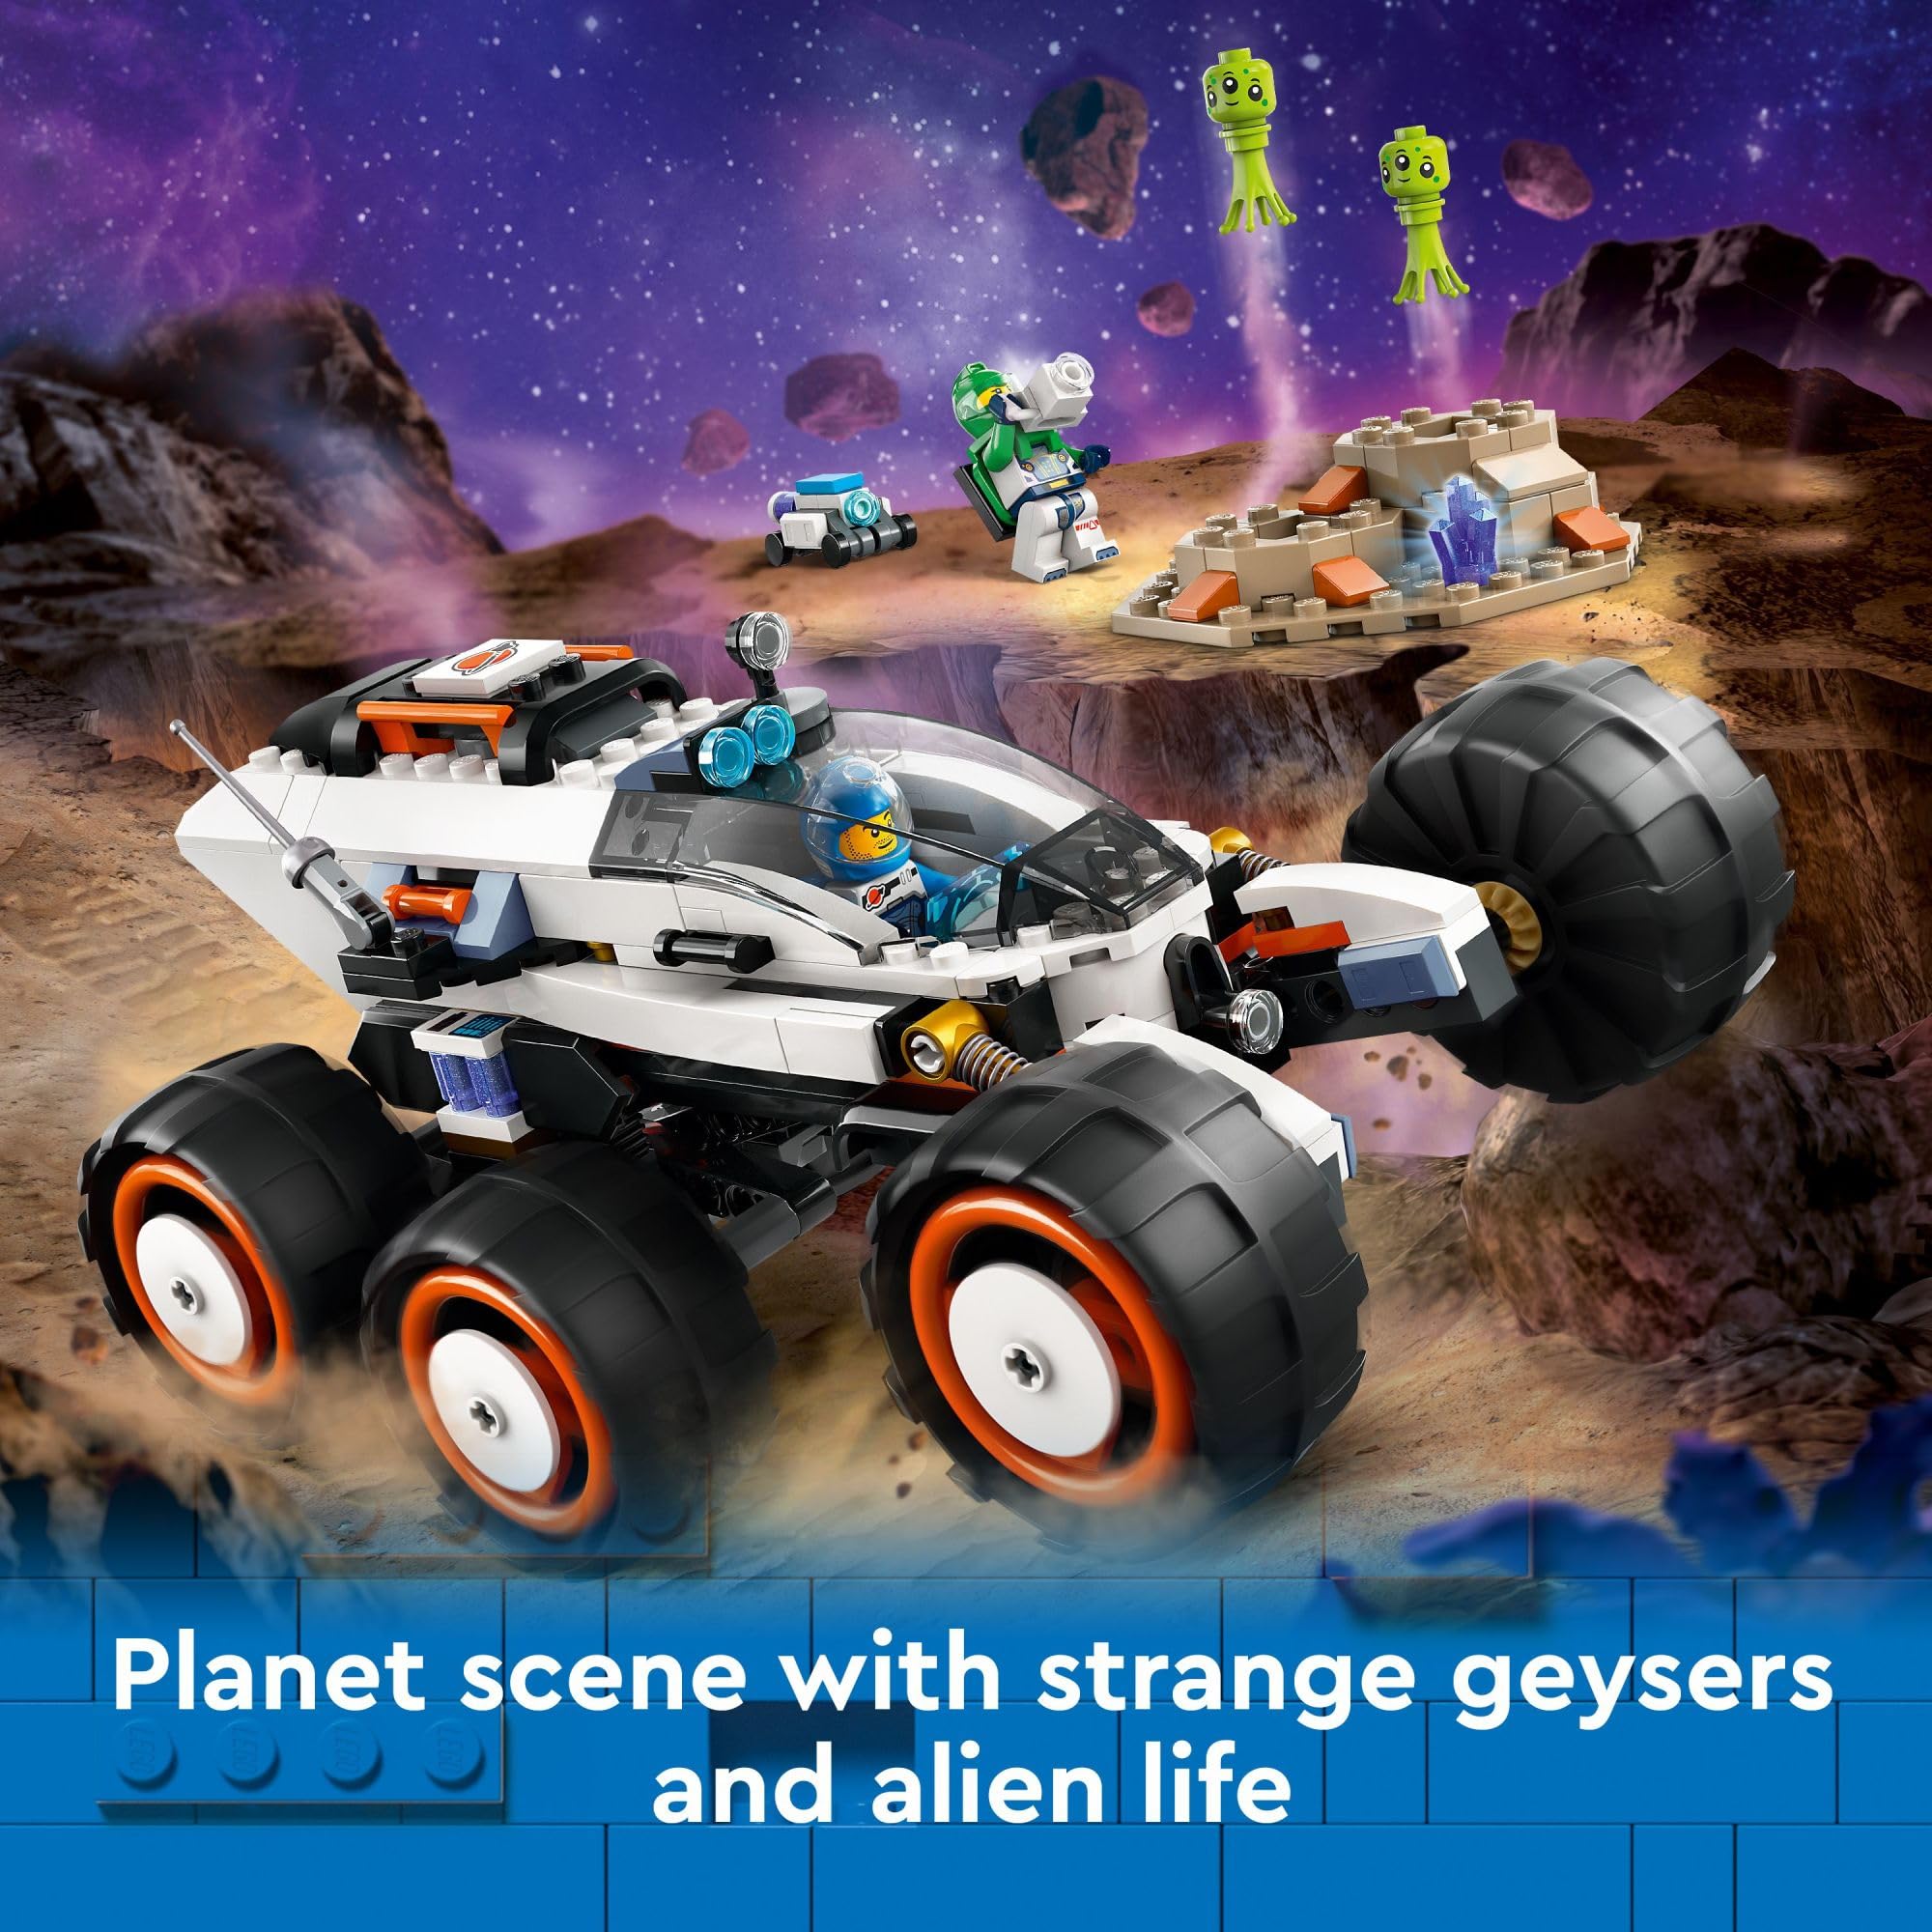 LEGO City Space Explorer Rover and Alien Life Toy, Space Gift for Boys and Girls Ages 6 and Up with 2 Minifigures, Robot and Extraterrestrial Figures, Pretend Play STEM Toy, 60431